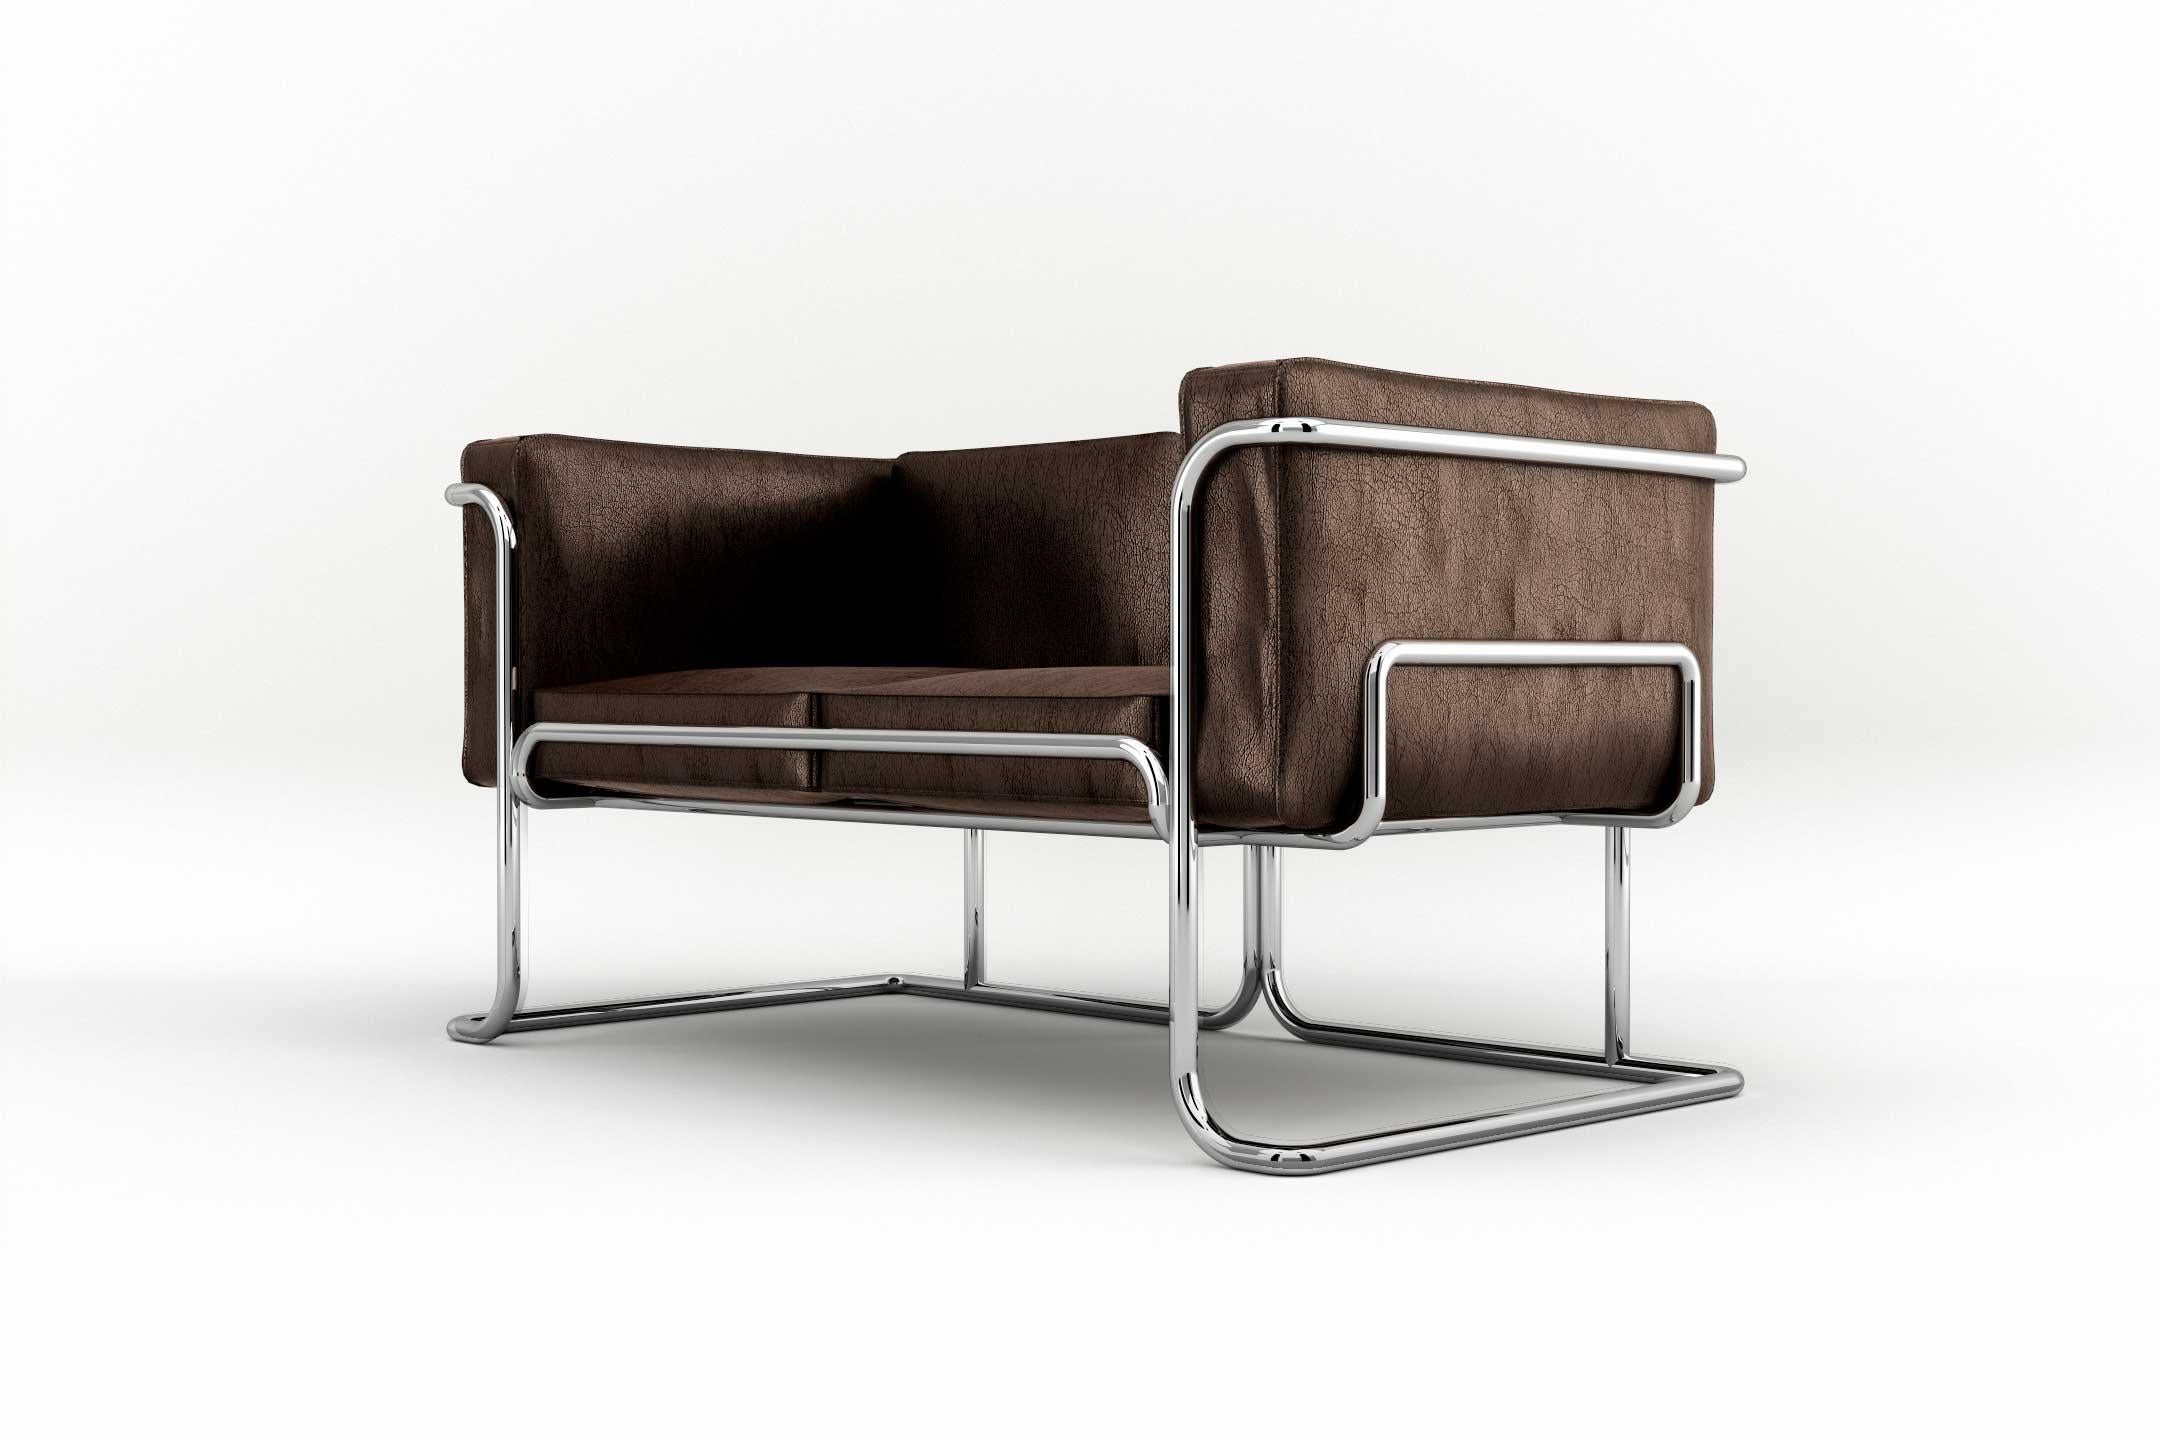 The Lotus collection was created as a reference of elegance and etiquette, imbuing its design of a magnetic personality with its geometrical beauty. Its structure is shaped from curved metal tubes with an upholstered leather seat and back which can